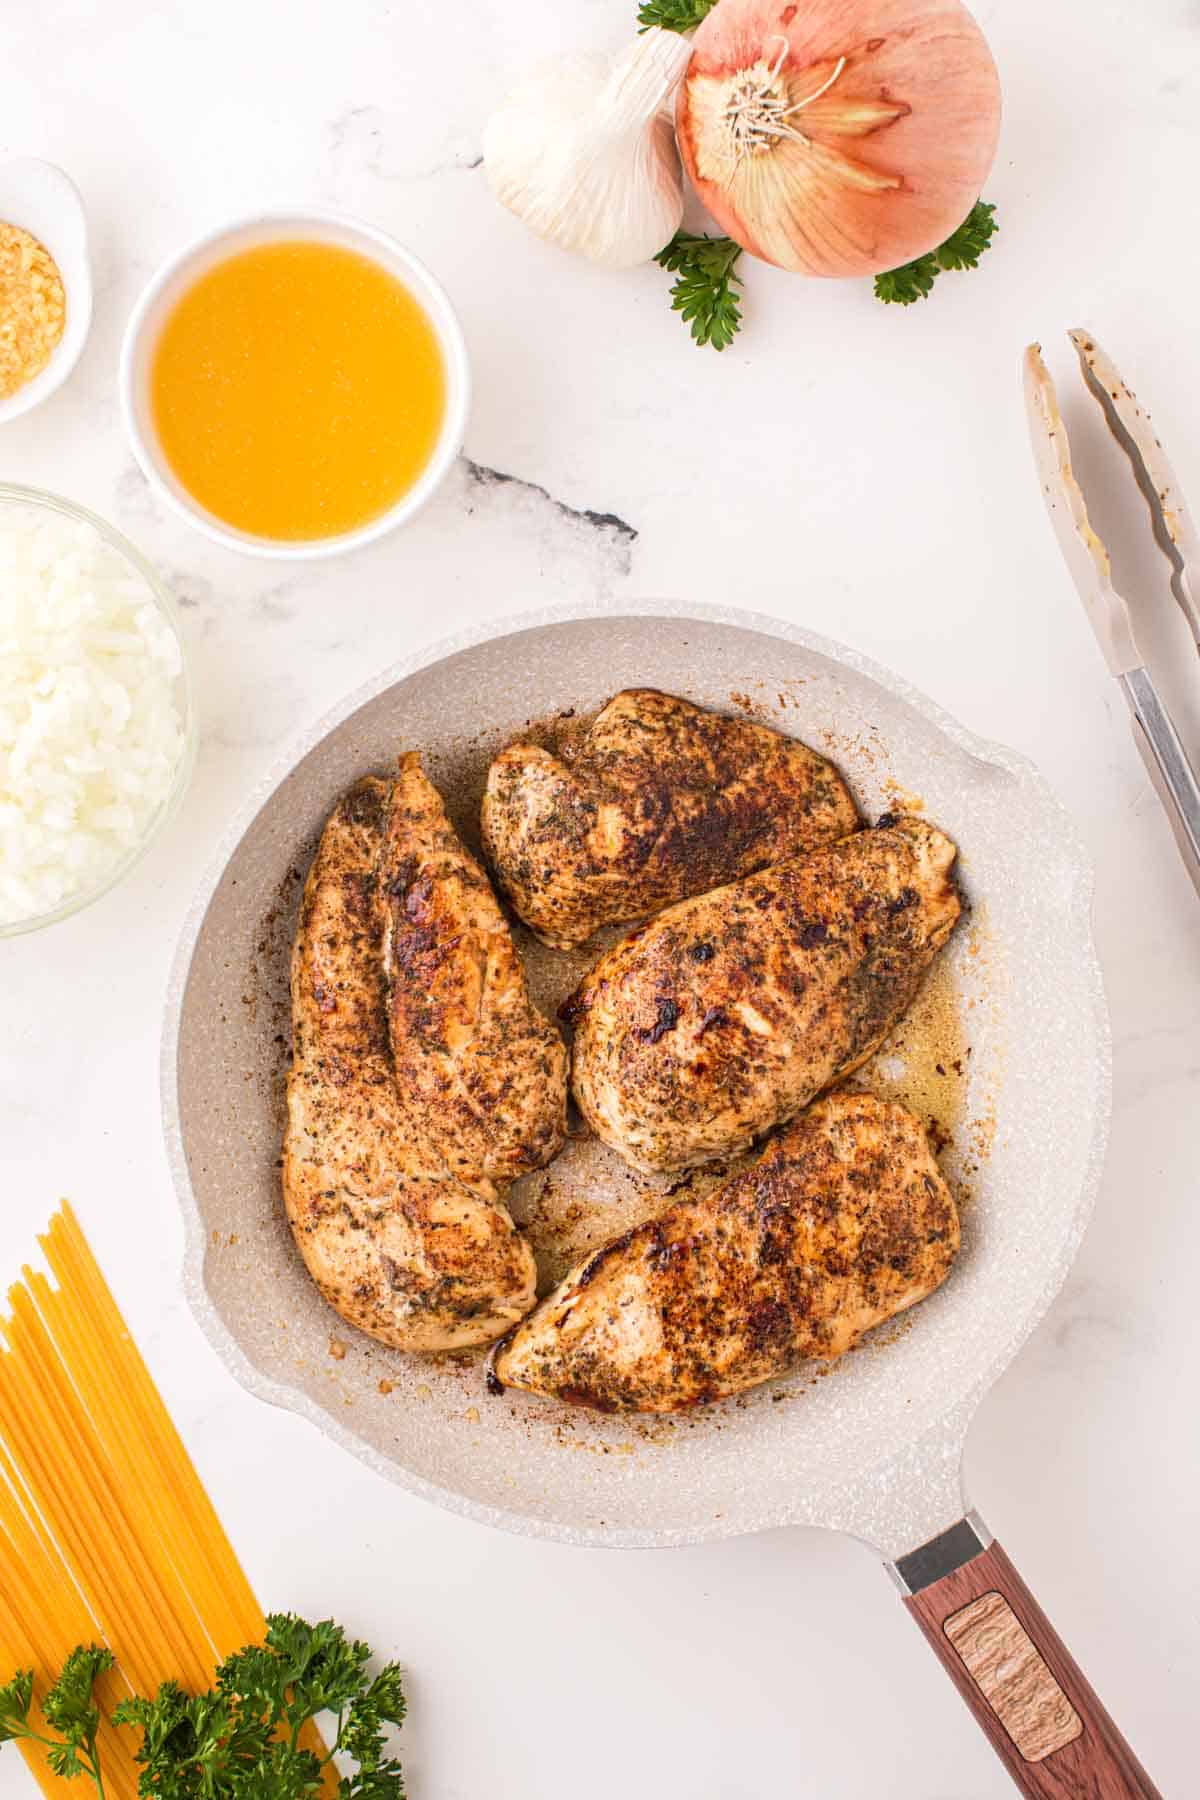 seasoned chicken breasts cooking in a skillet